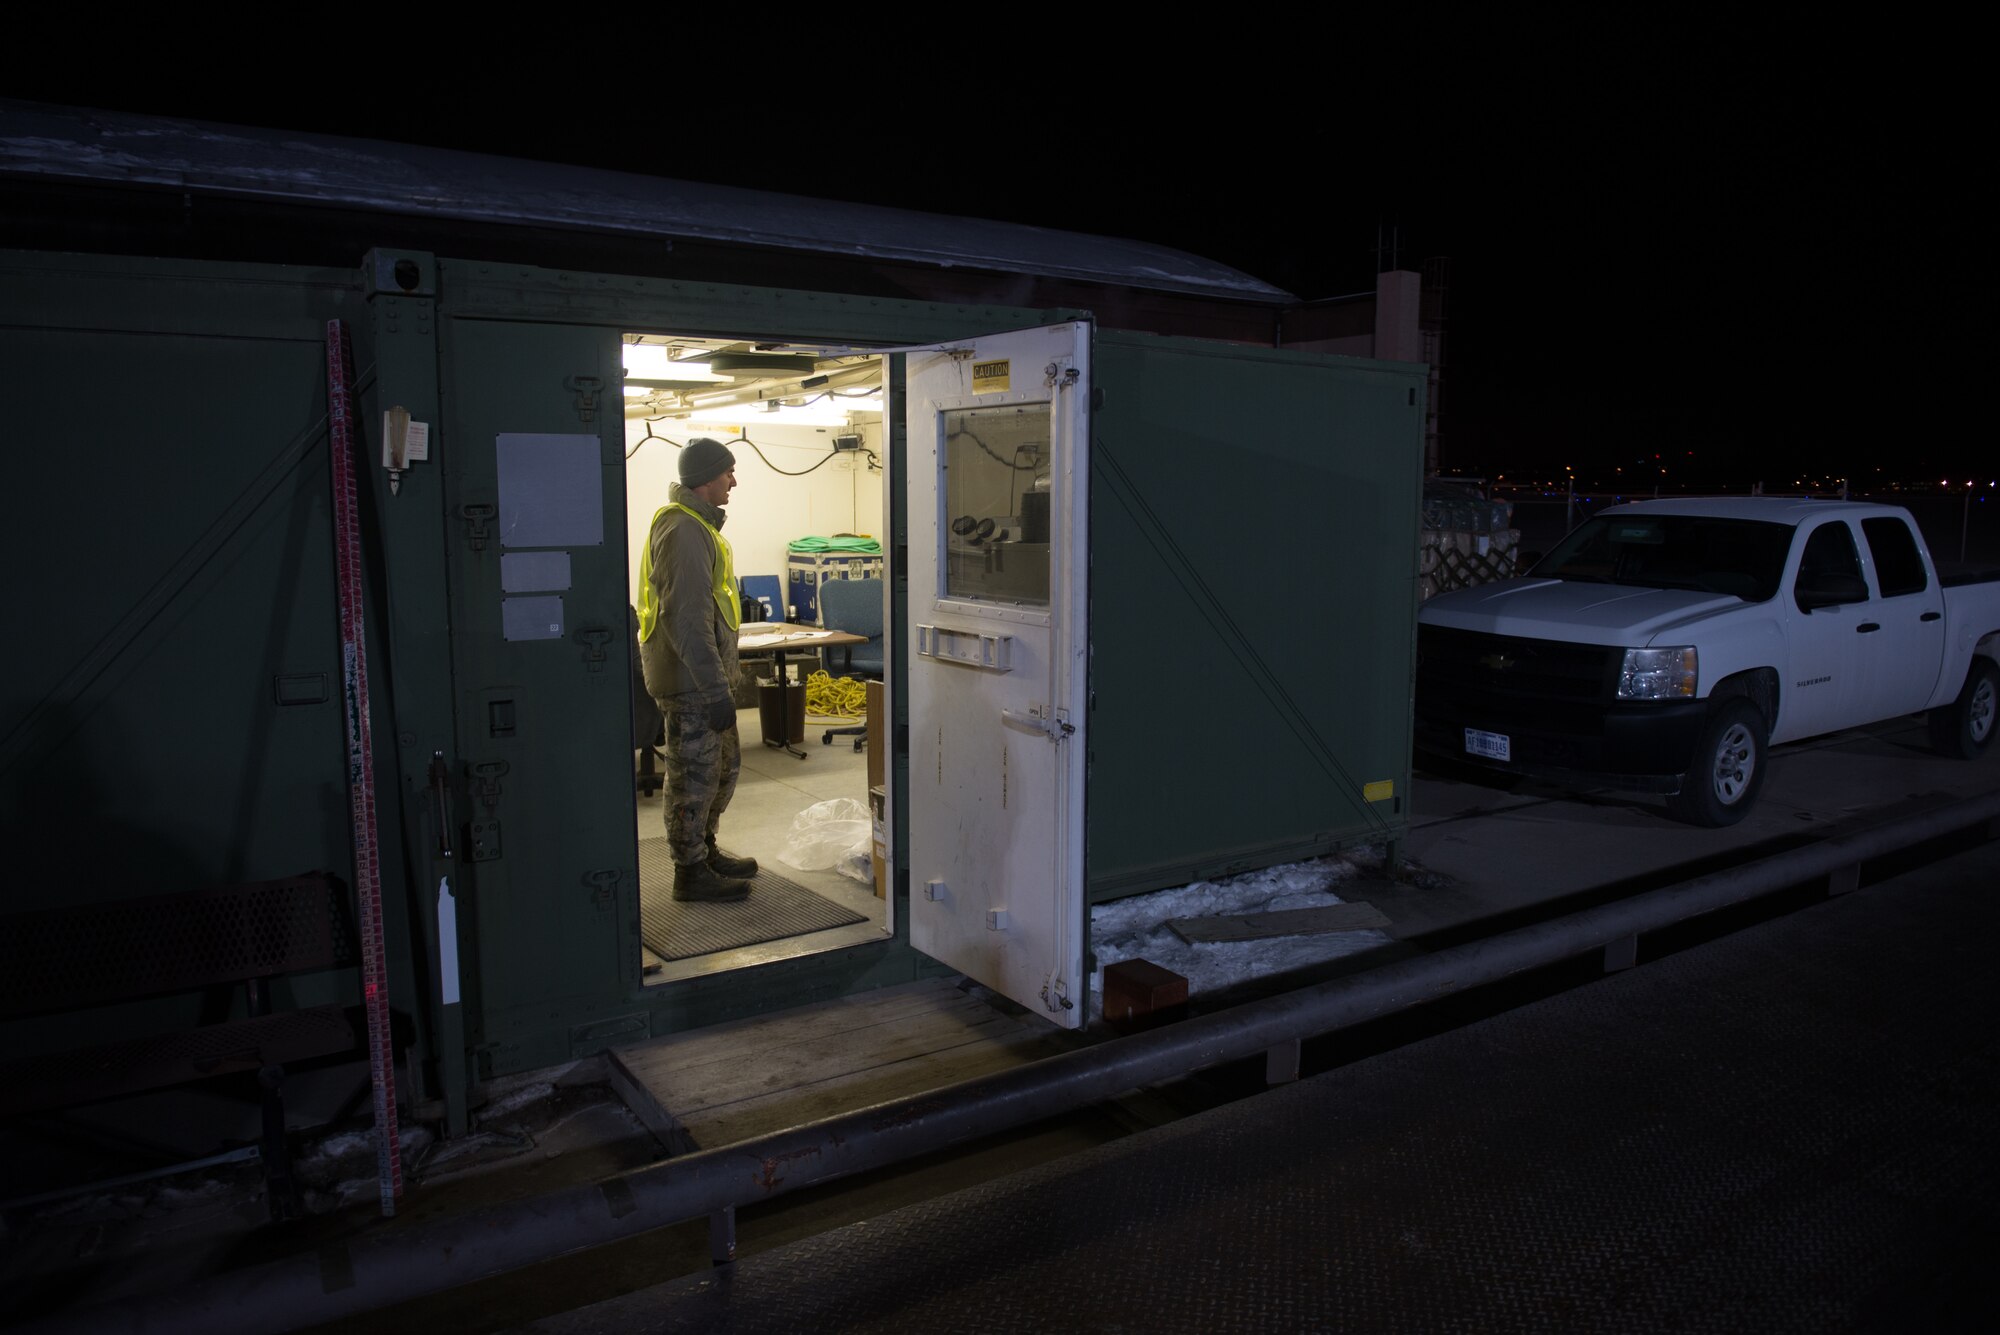 A member of Team Offutt coordinates the weighing of cargo Jan. 29, 2019, on Offutt Air Force Base, Nebraska. More than 600 members of the base took part in Phase I of Operational Readiness Exercise Winter Havoc. (U.S. Air Force photo by Tech. Sgt. Rachelle Blake)